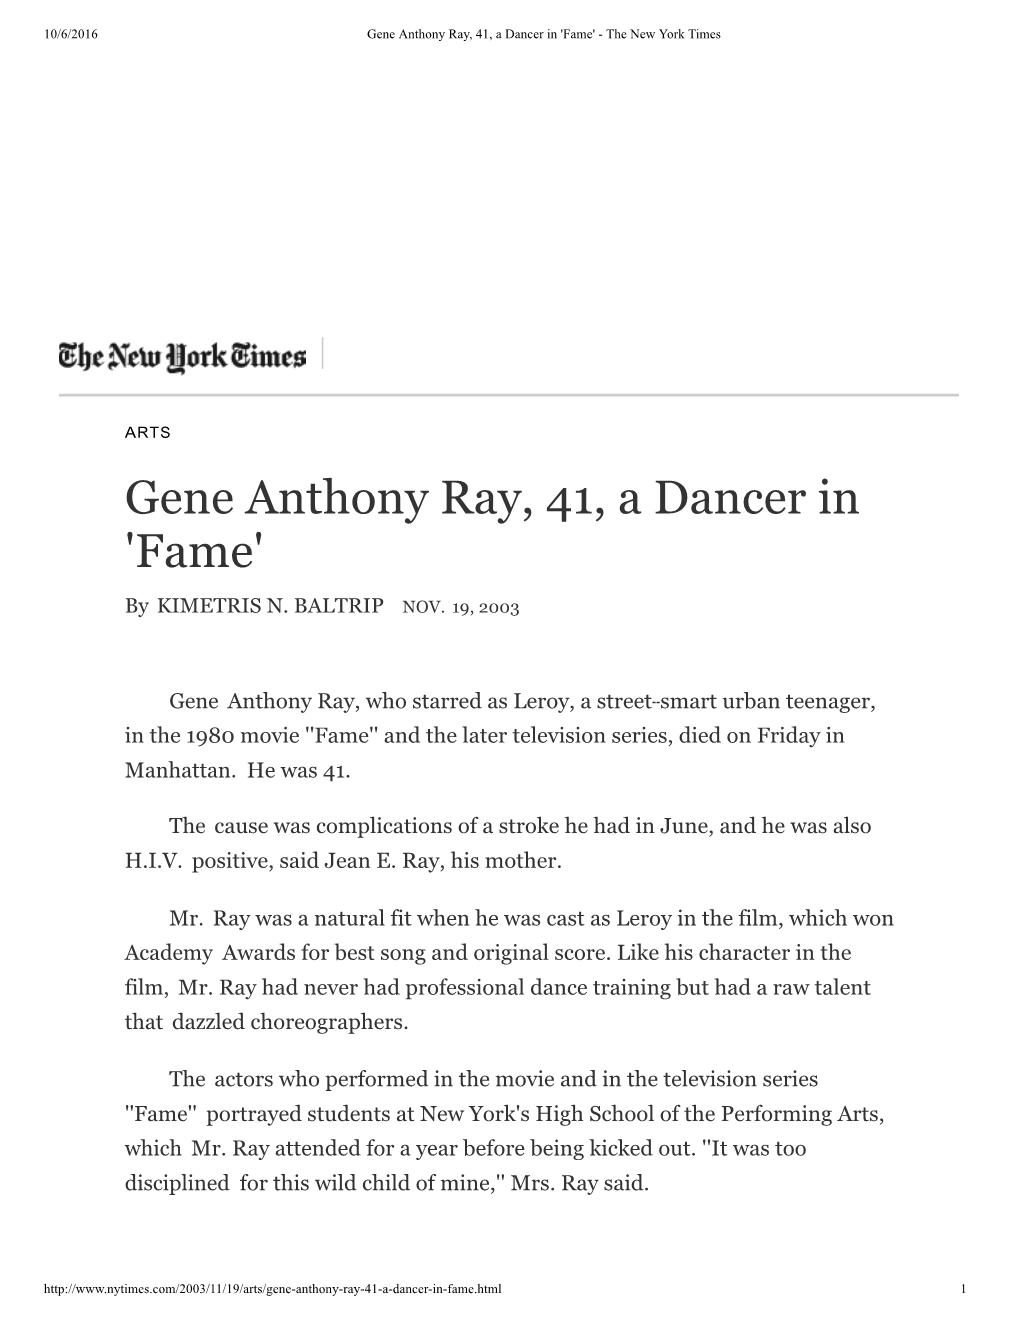 Gene Anthony Ray, 41, a Dancer in 'Fame' - the New York Times